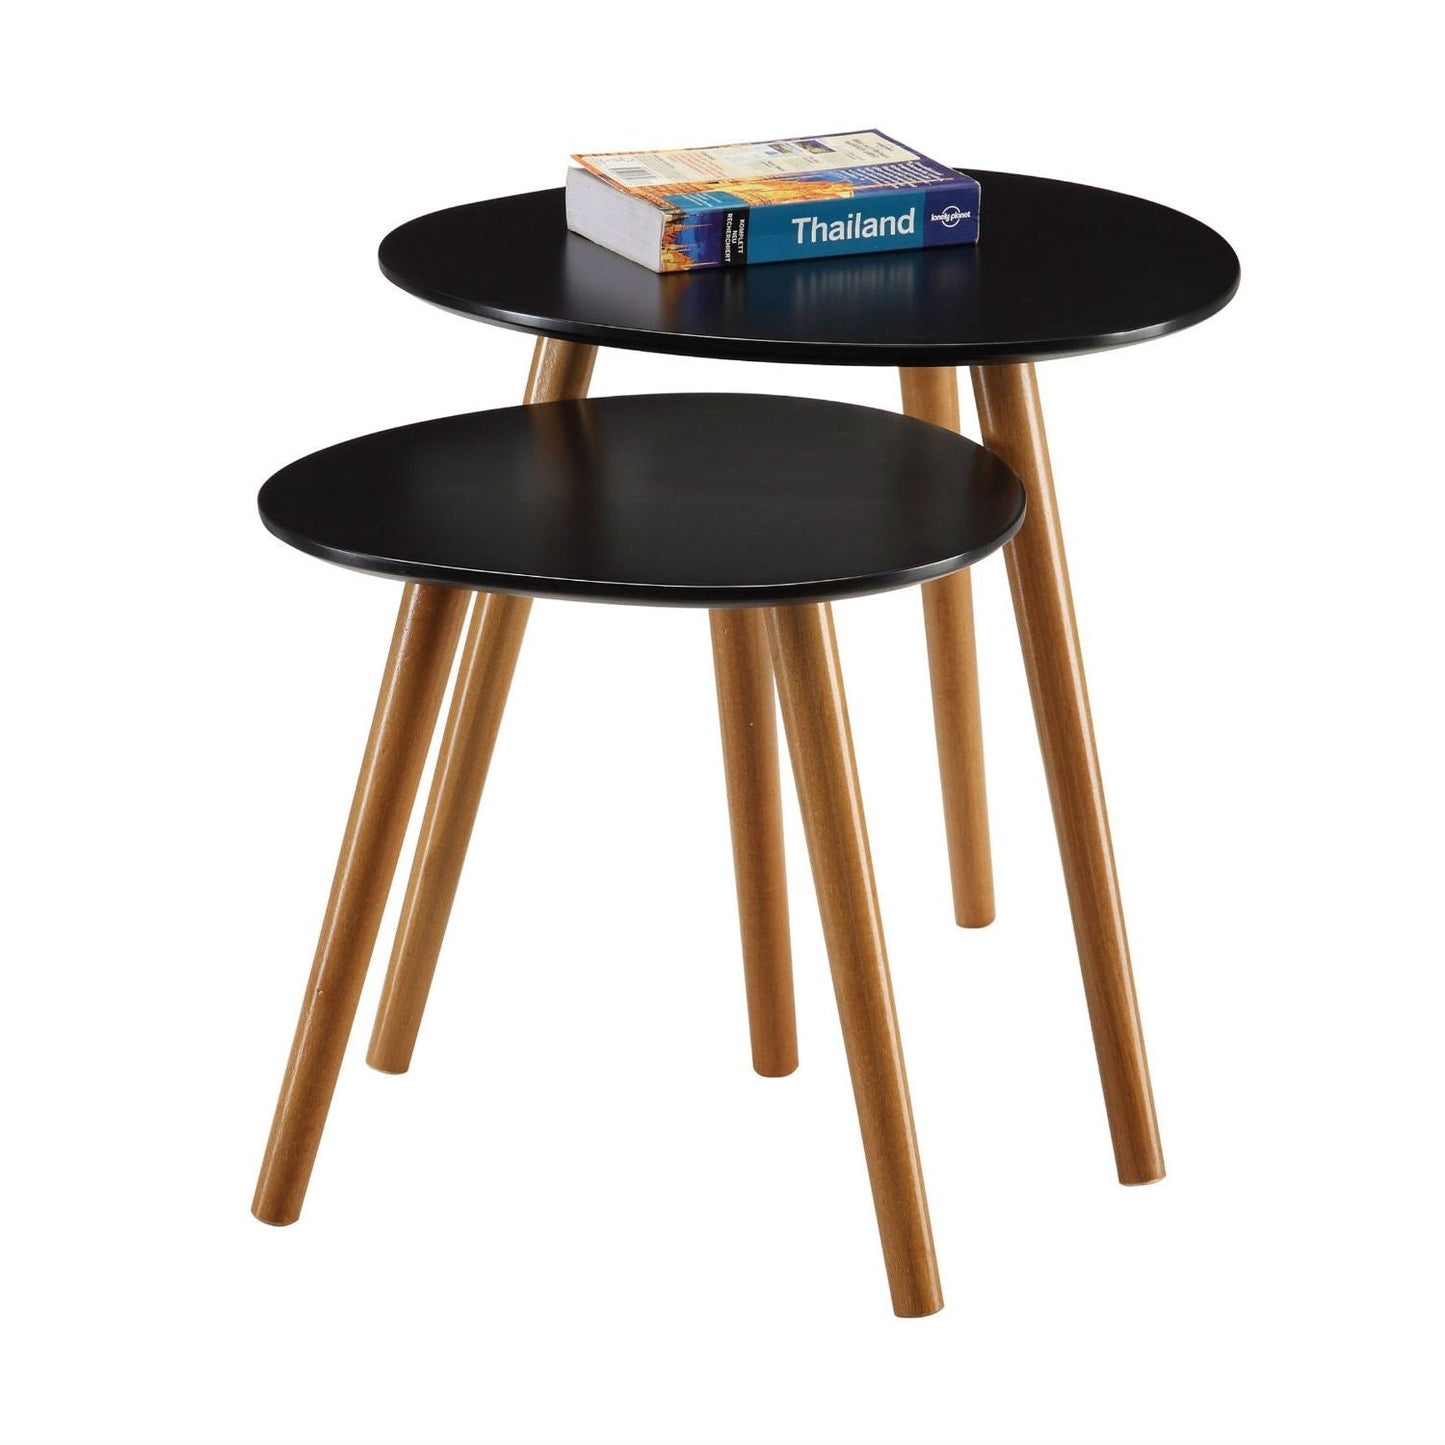 Living Room > Coffee Tables - Set Of 2 - Modern Mid-Century Style Nesting Tables End Table In Black